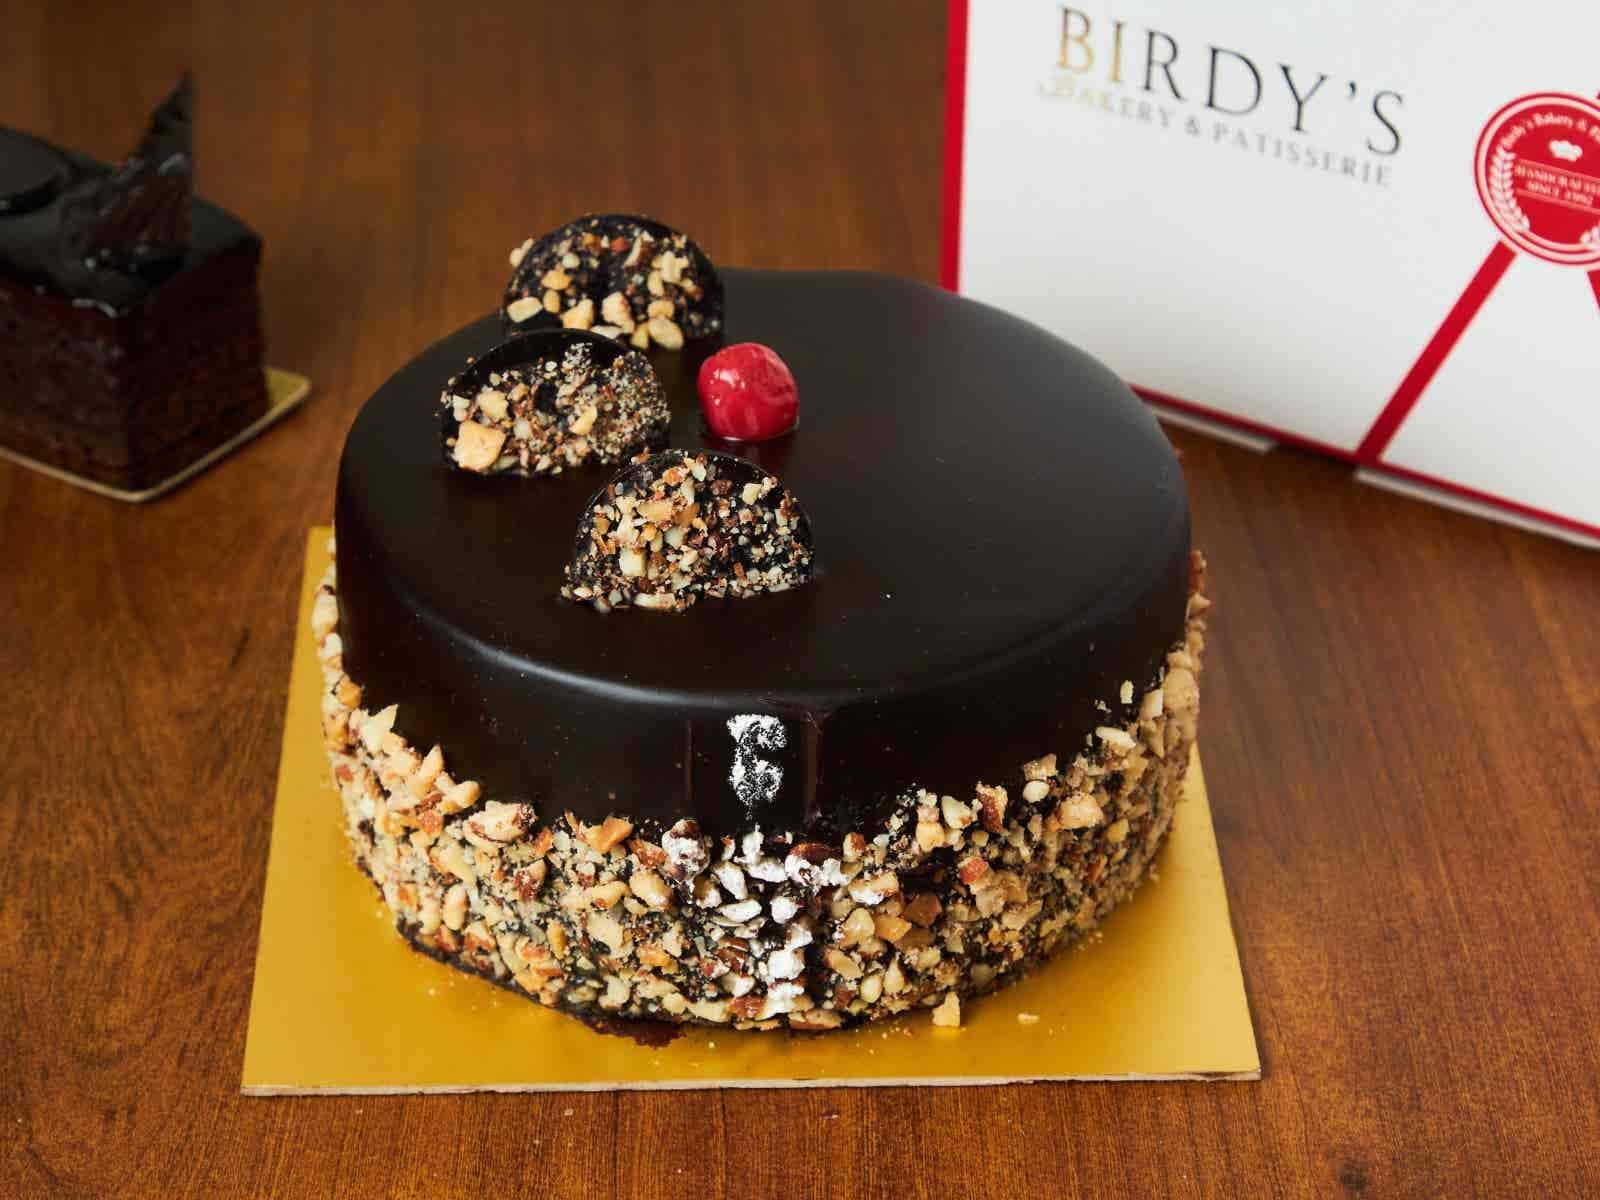 Birdy's Bakery Patisserie Cafe - Cherish all your special celebrations with  our Signature Chocolate Cake that would turn any event into a beautiful and  unforgettable memory. #birdys #birdysbakery #celebratewithbirdys  #freshlybaked #freshcakes ...